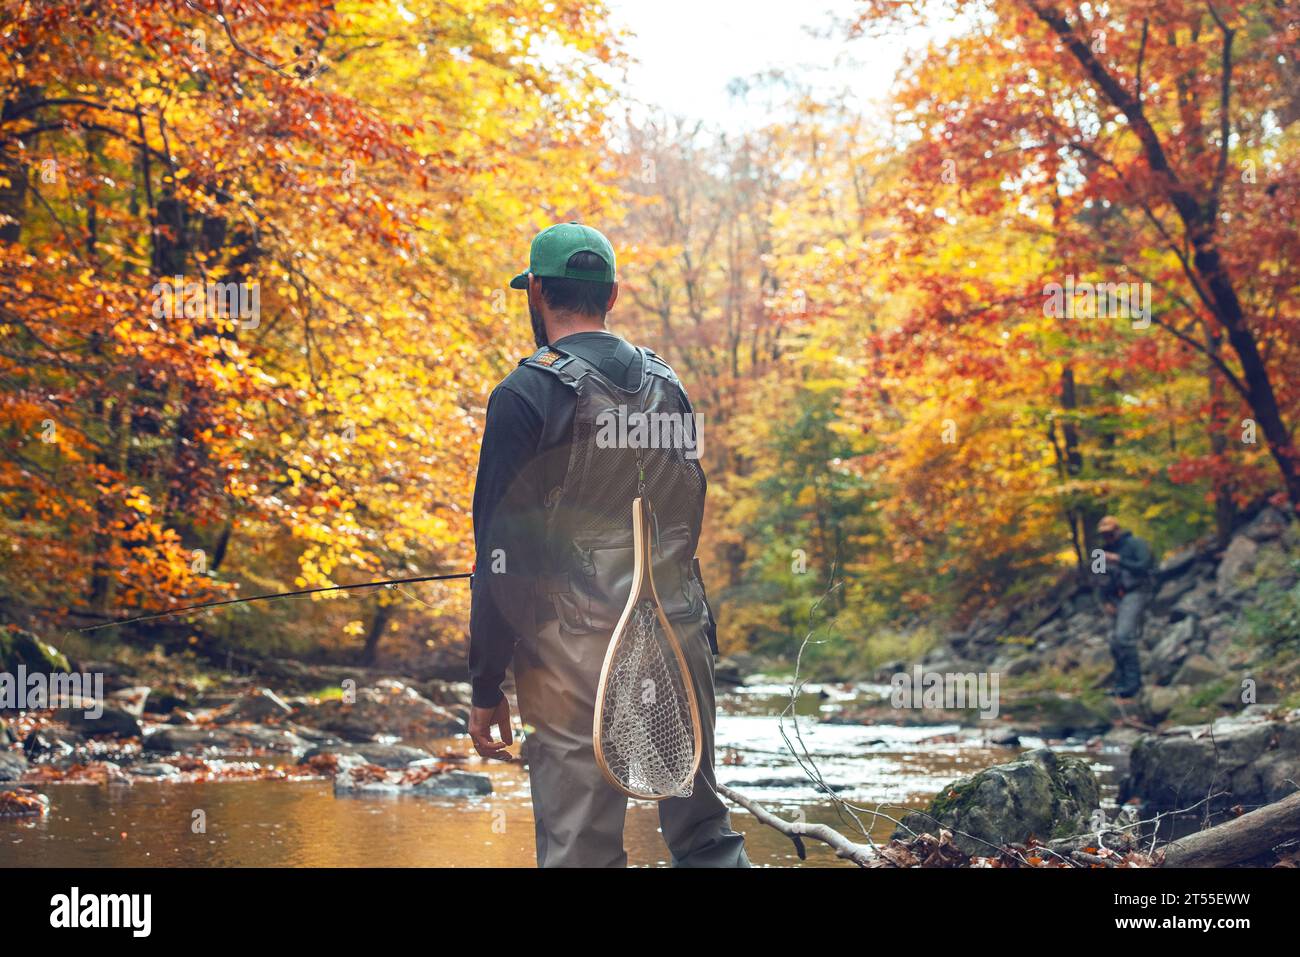 Man fly fishing in a river on a bright sunny colorful fall day Stock Photo